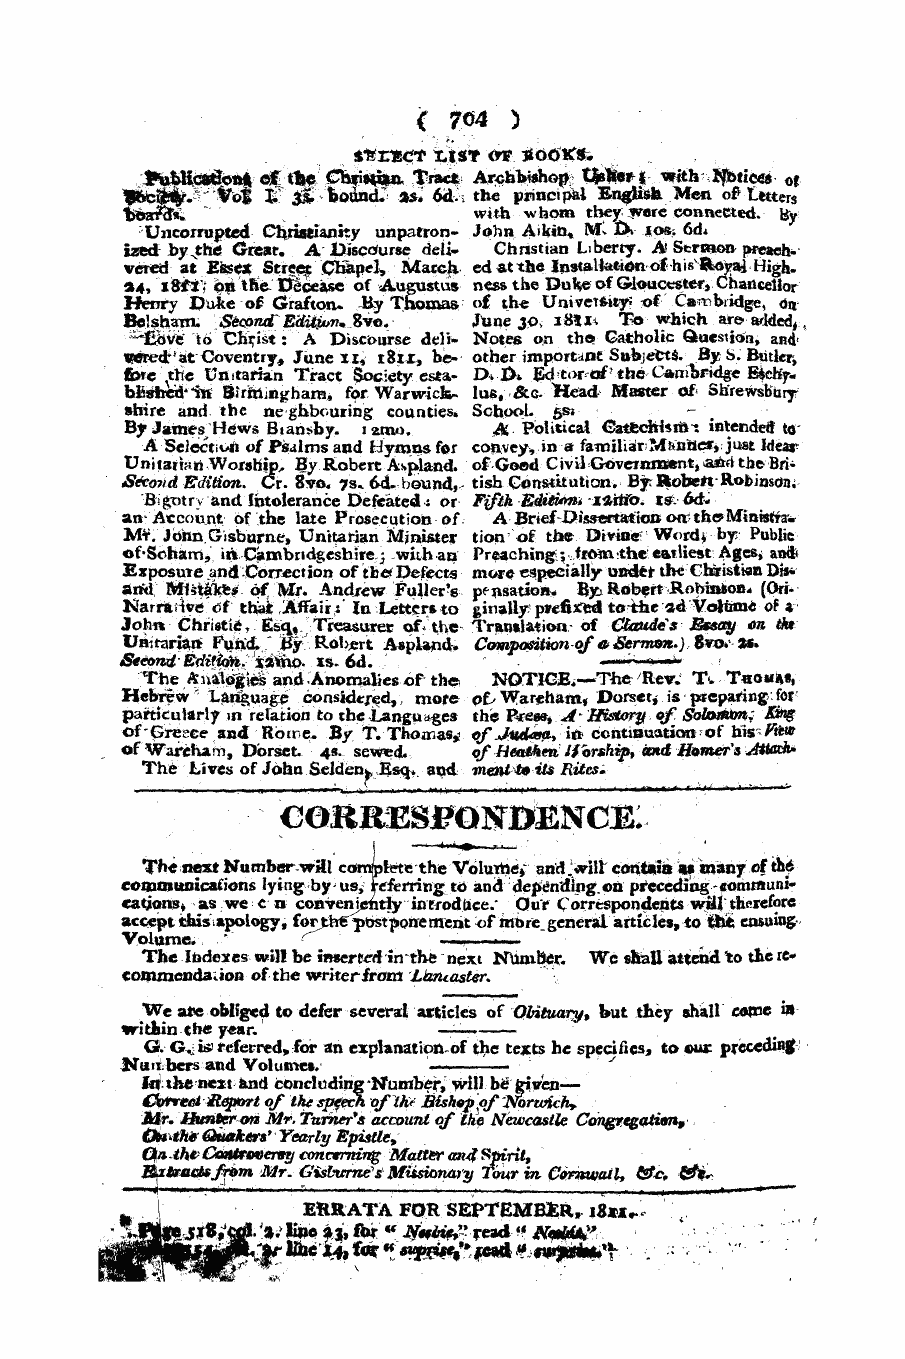 Monthly Repository (1806-1838) and Unitarian Chronicle (1832-1833): F Y, 1st edition: 62